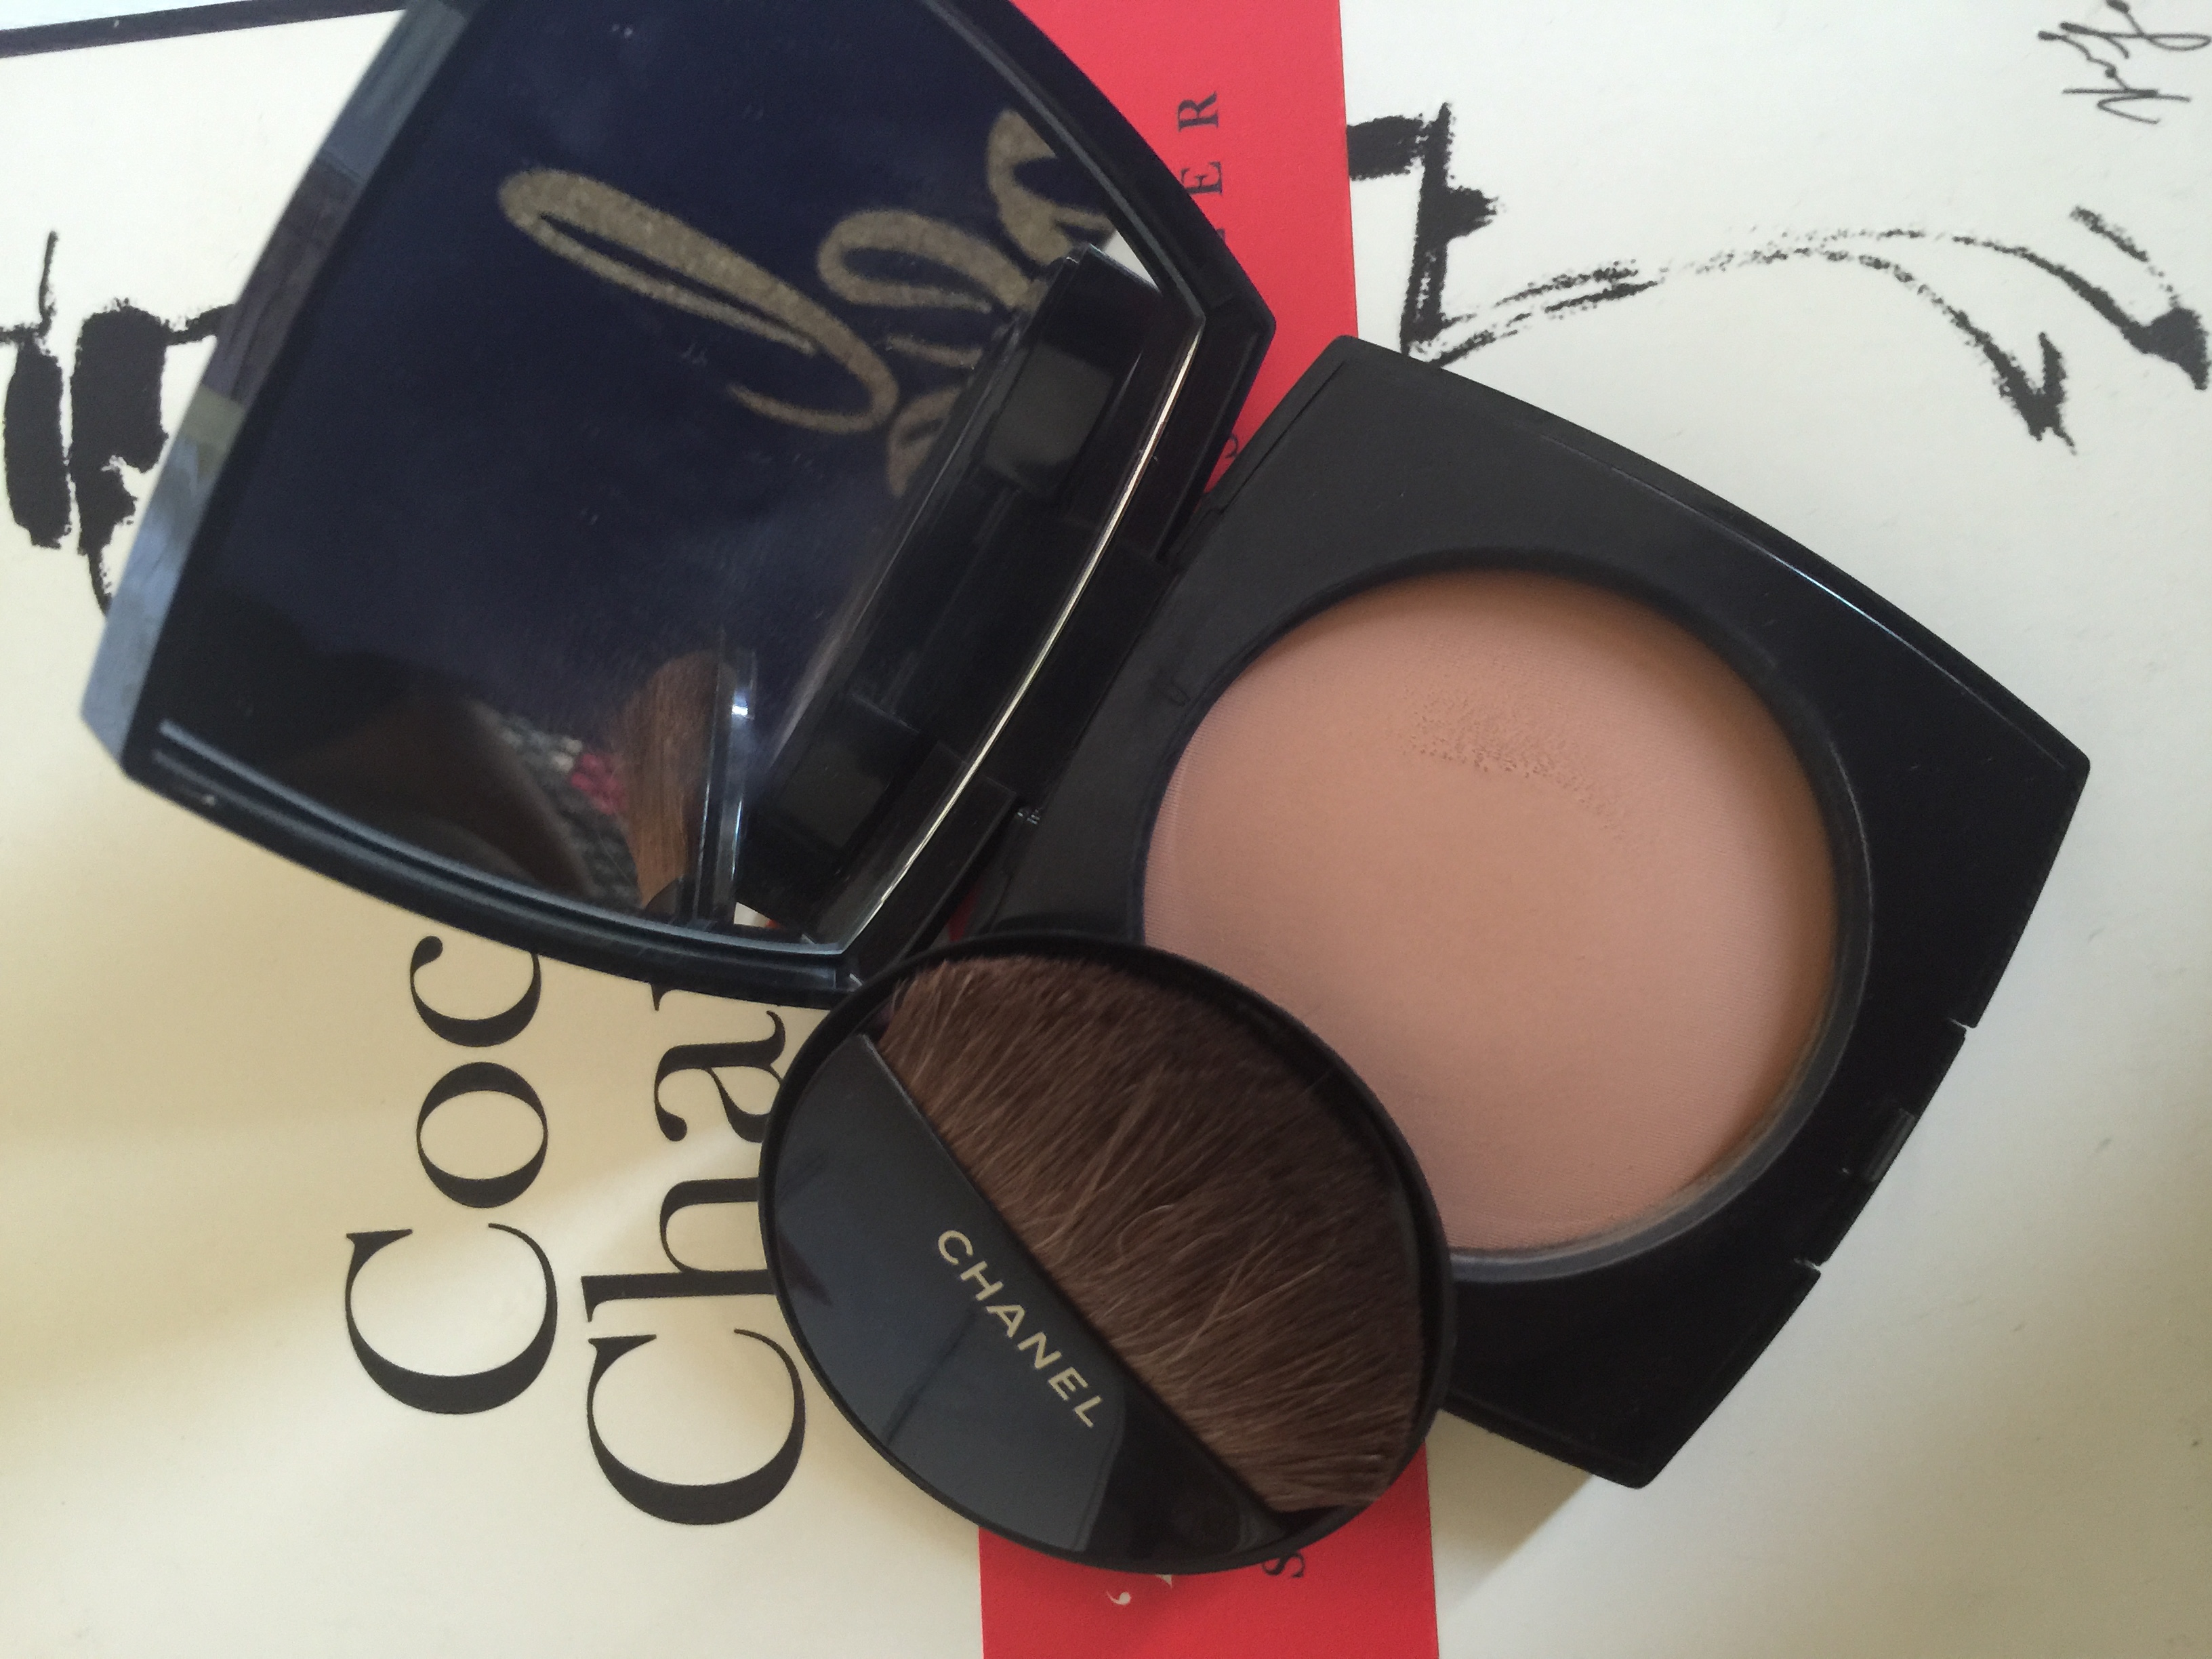 LES BEIGES Healthy Glow Sheer Powder by CHANEL at ORCHARD MILE